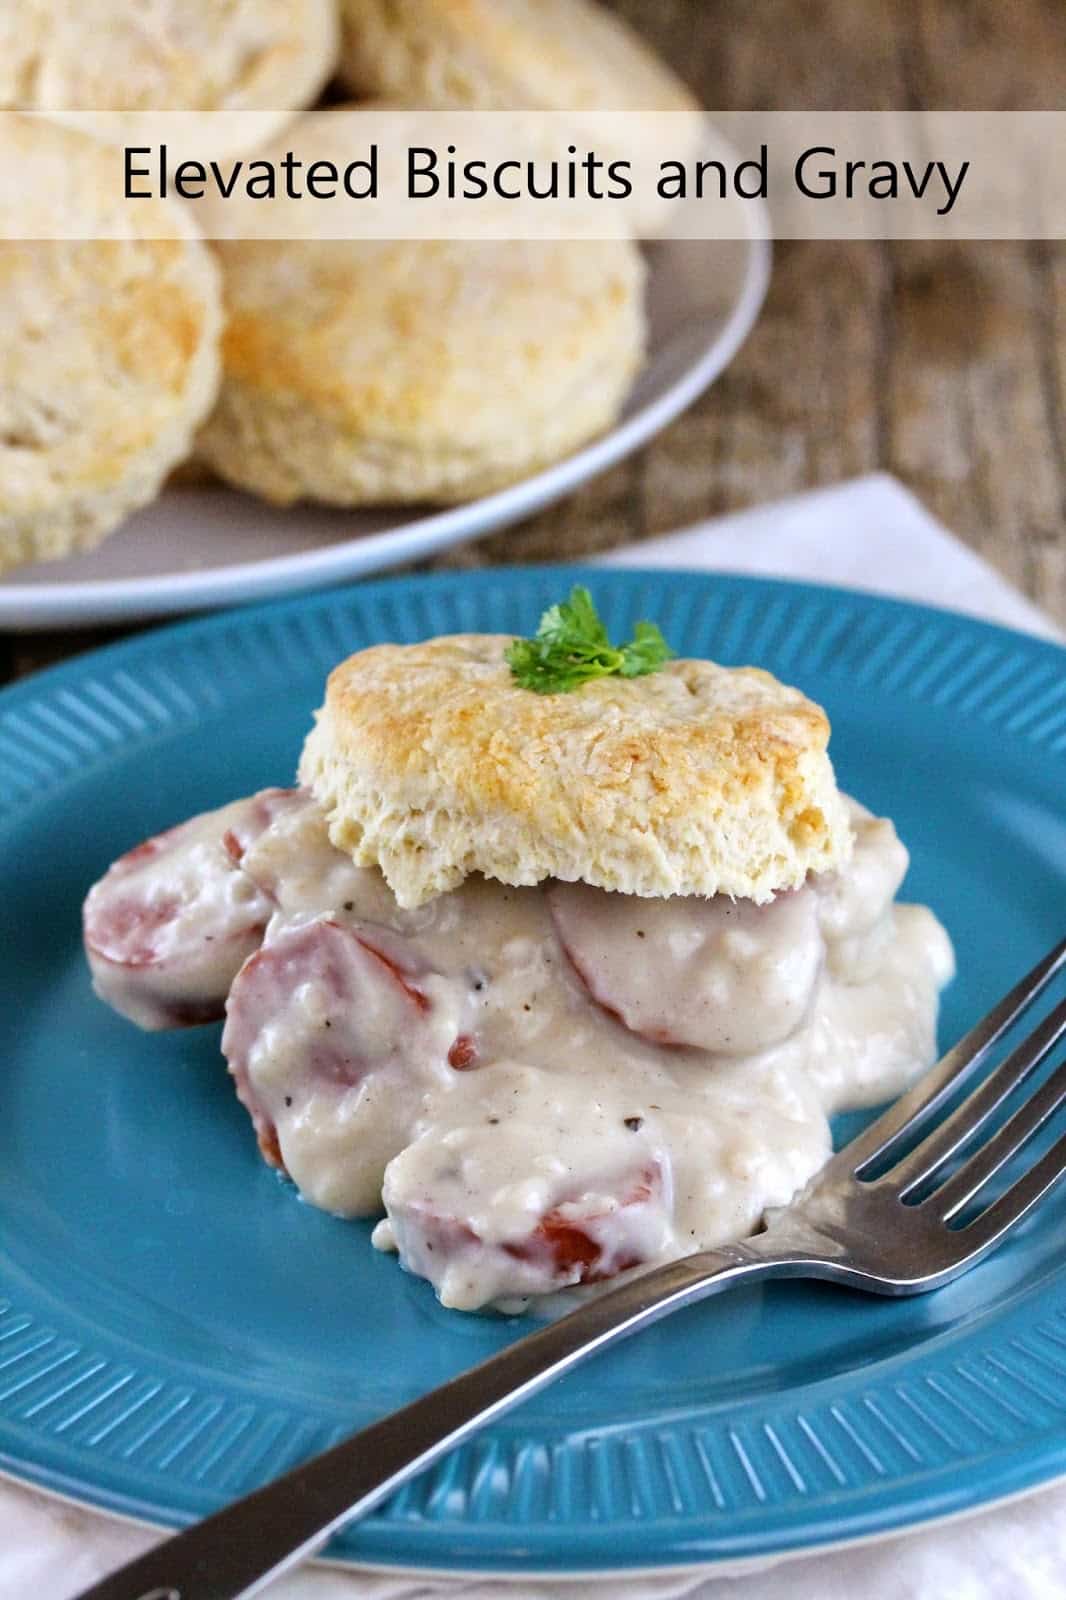 Elevated Biscuits and Gravy with Italian Sausage and Mushrooms